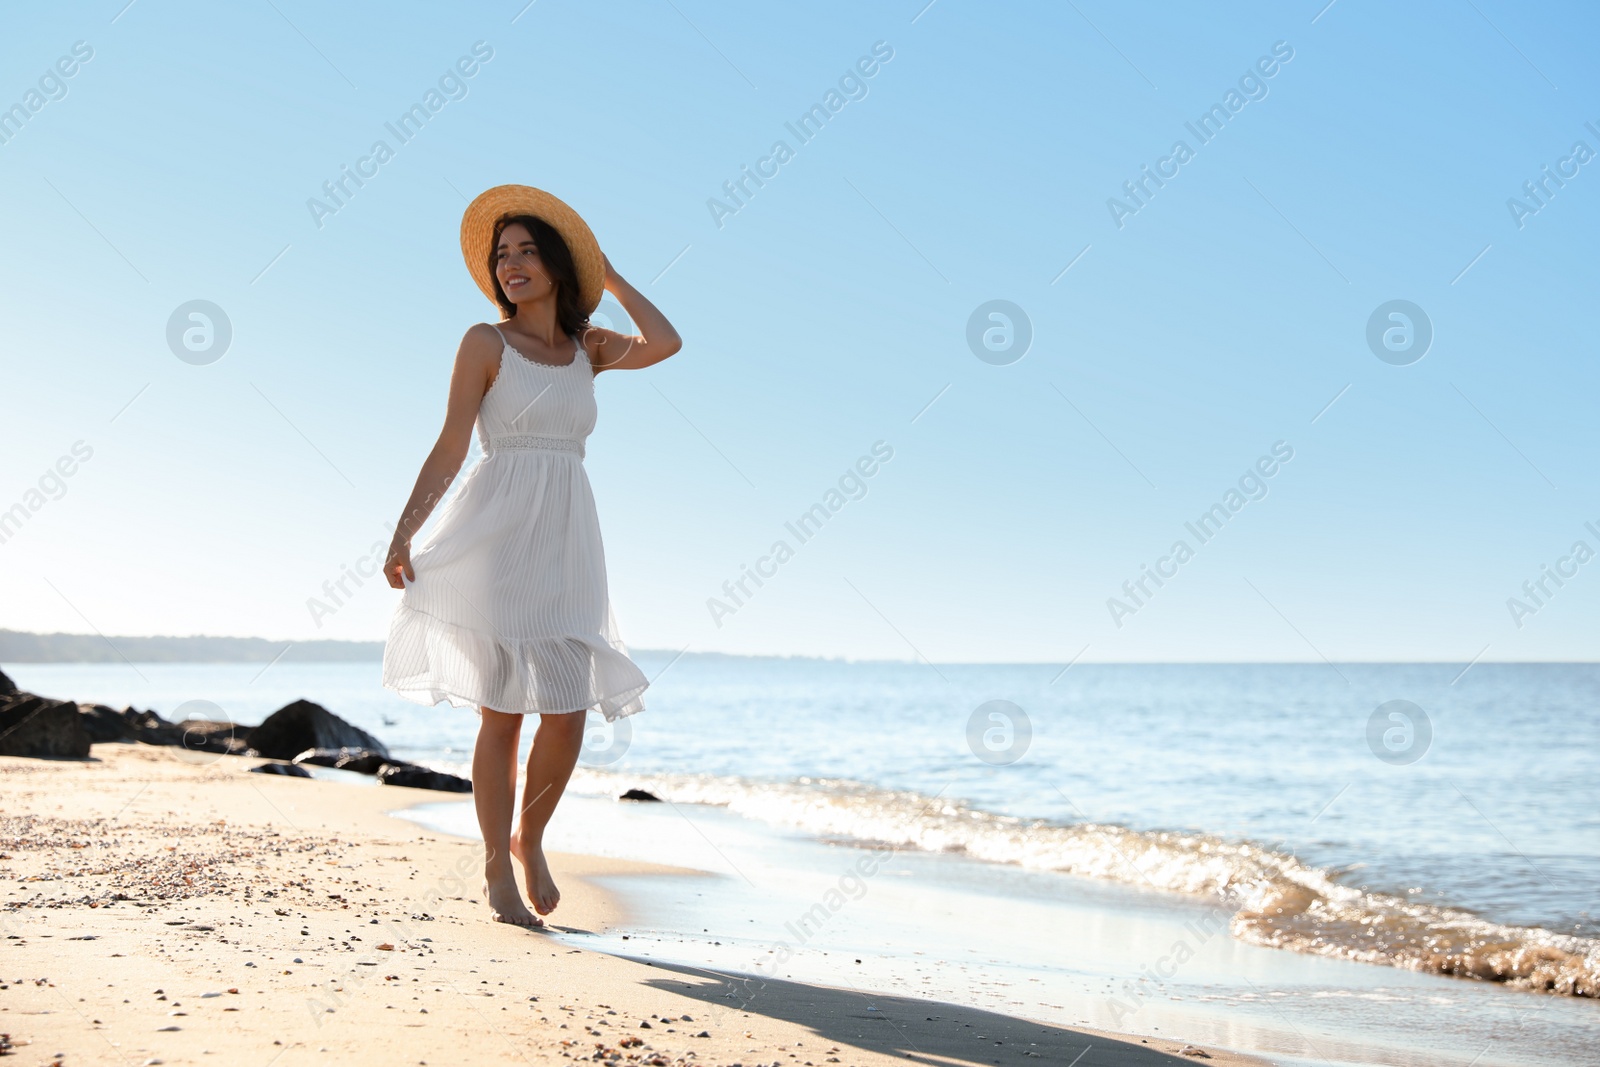 Photo of Happy young woman with hat walking on beach near sea. Space for text